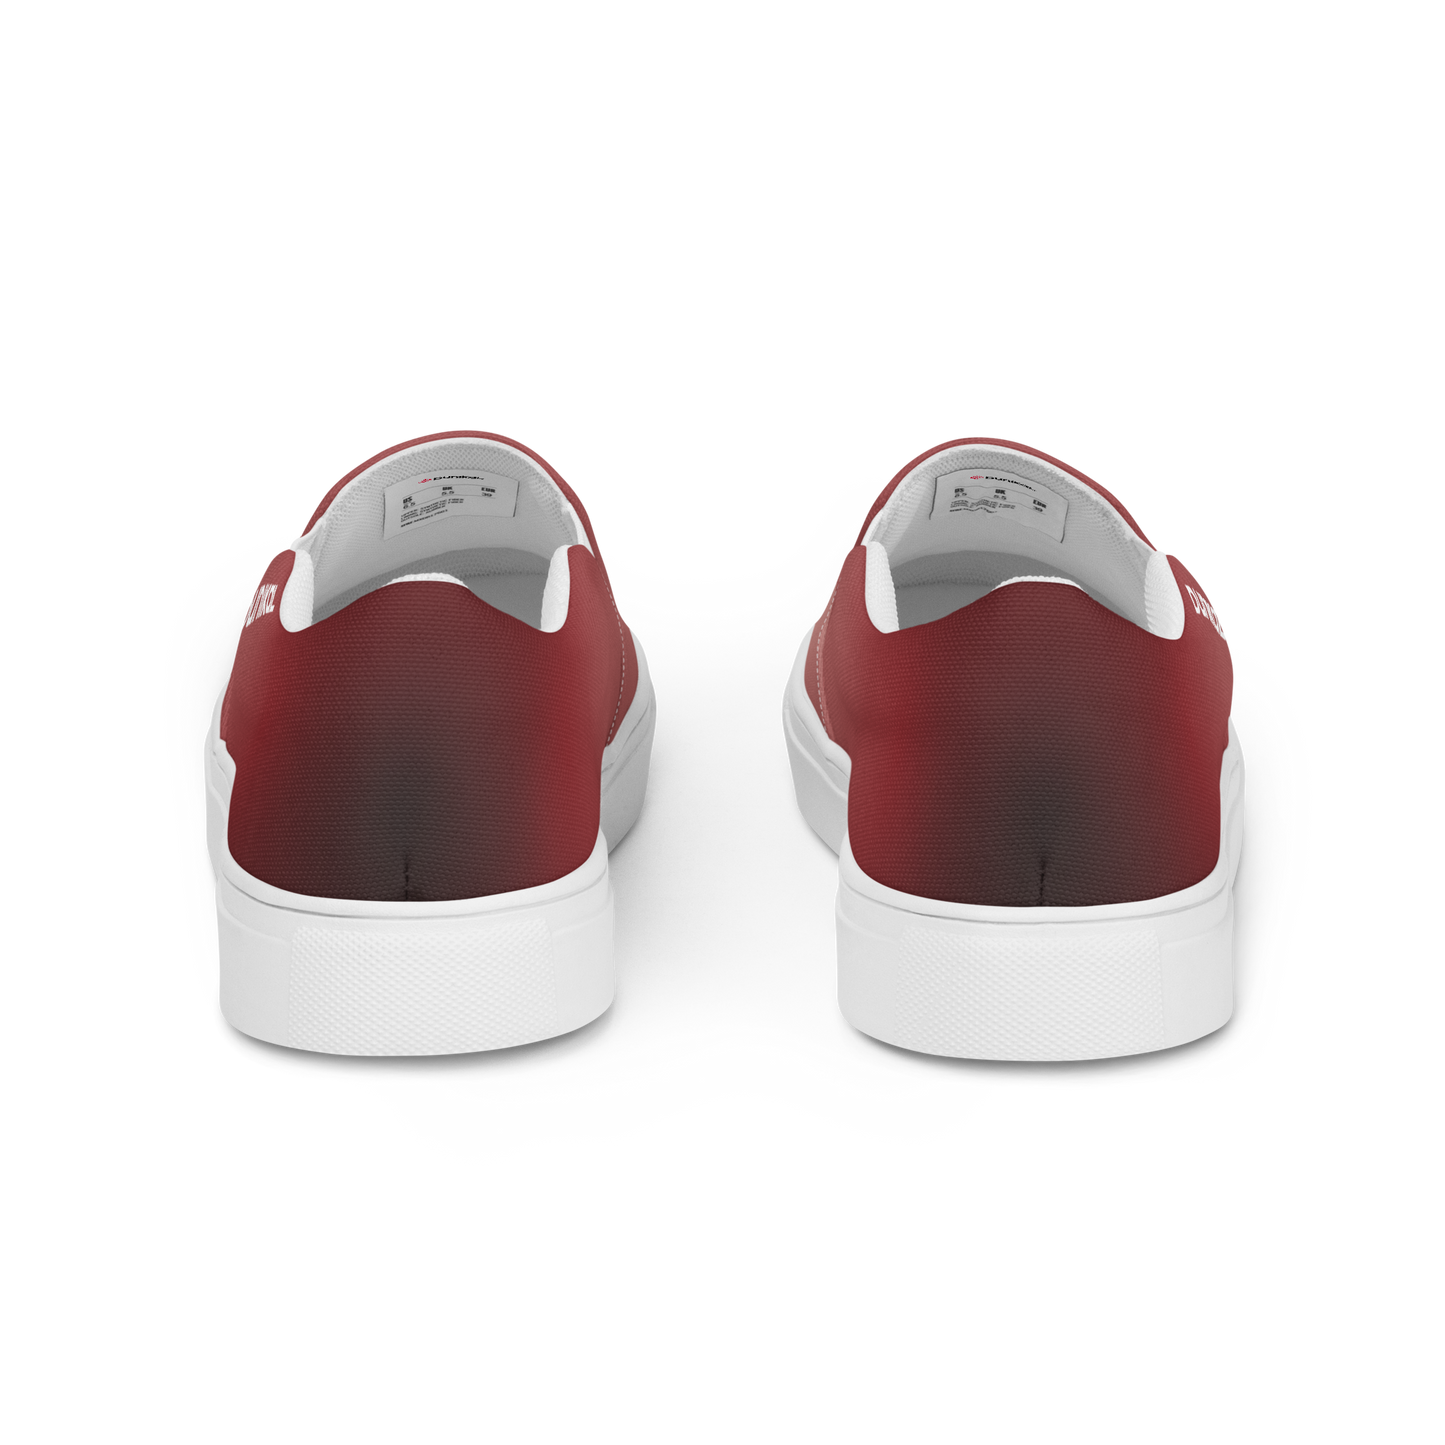 Men's Canvas Slip-ons ❯ Pure Gradient ❯ Ruby Red